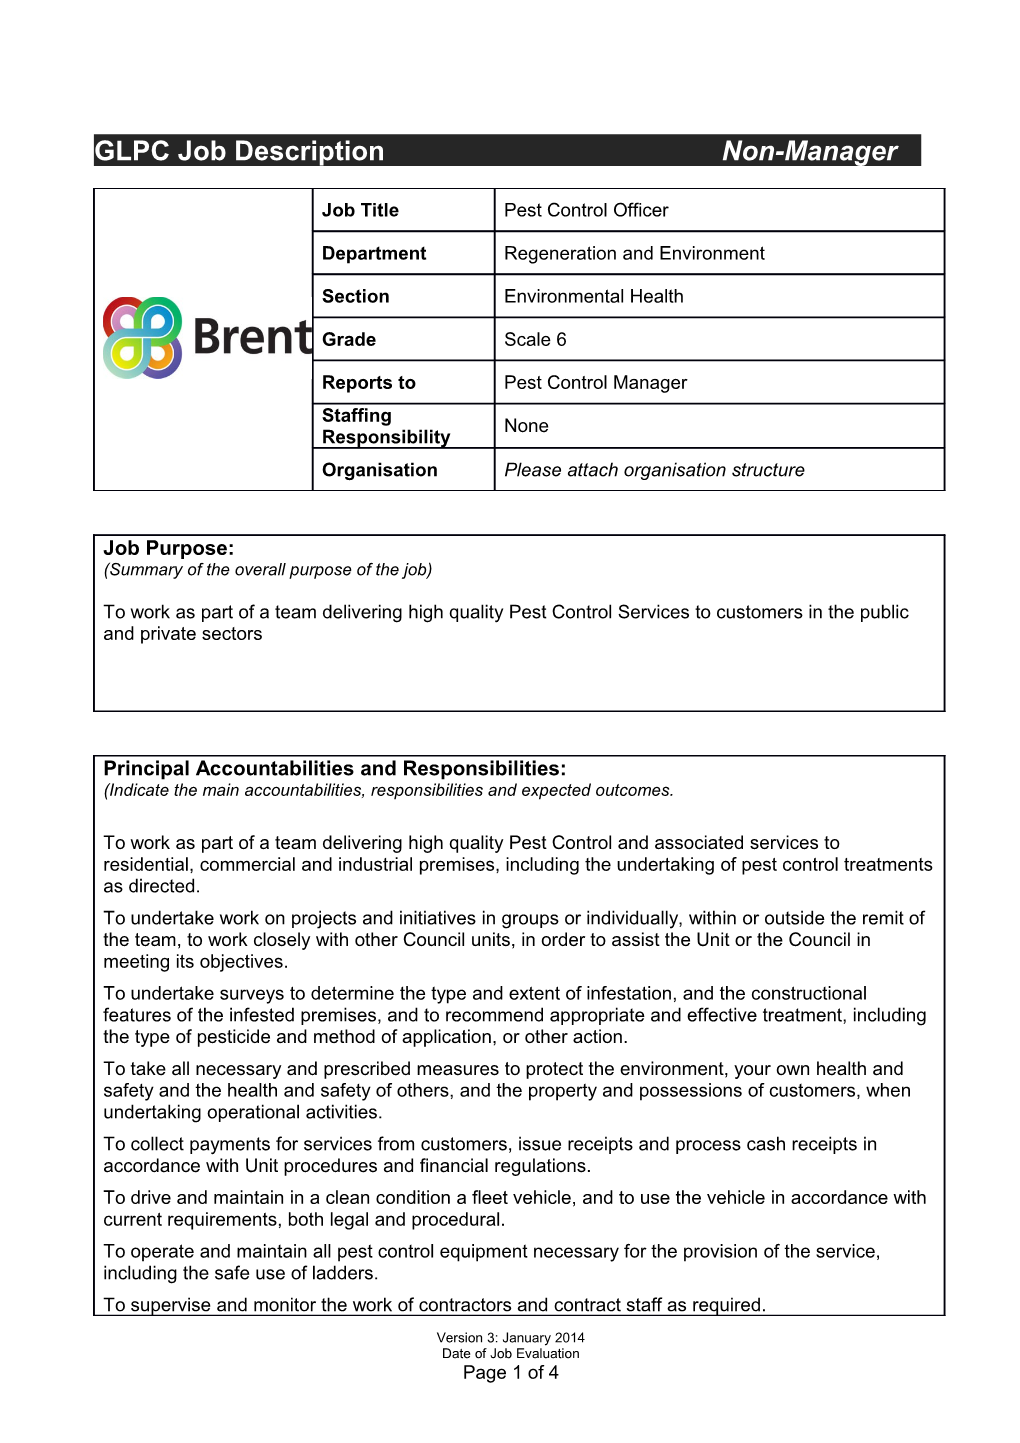 Application for Job Evaluation s4